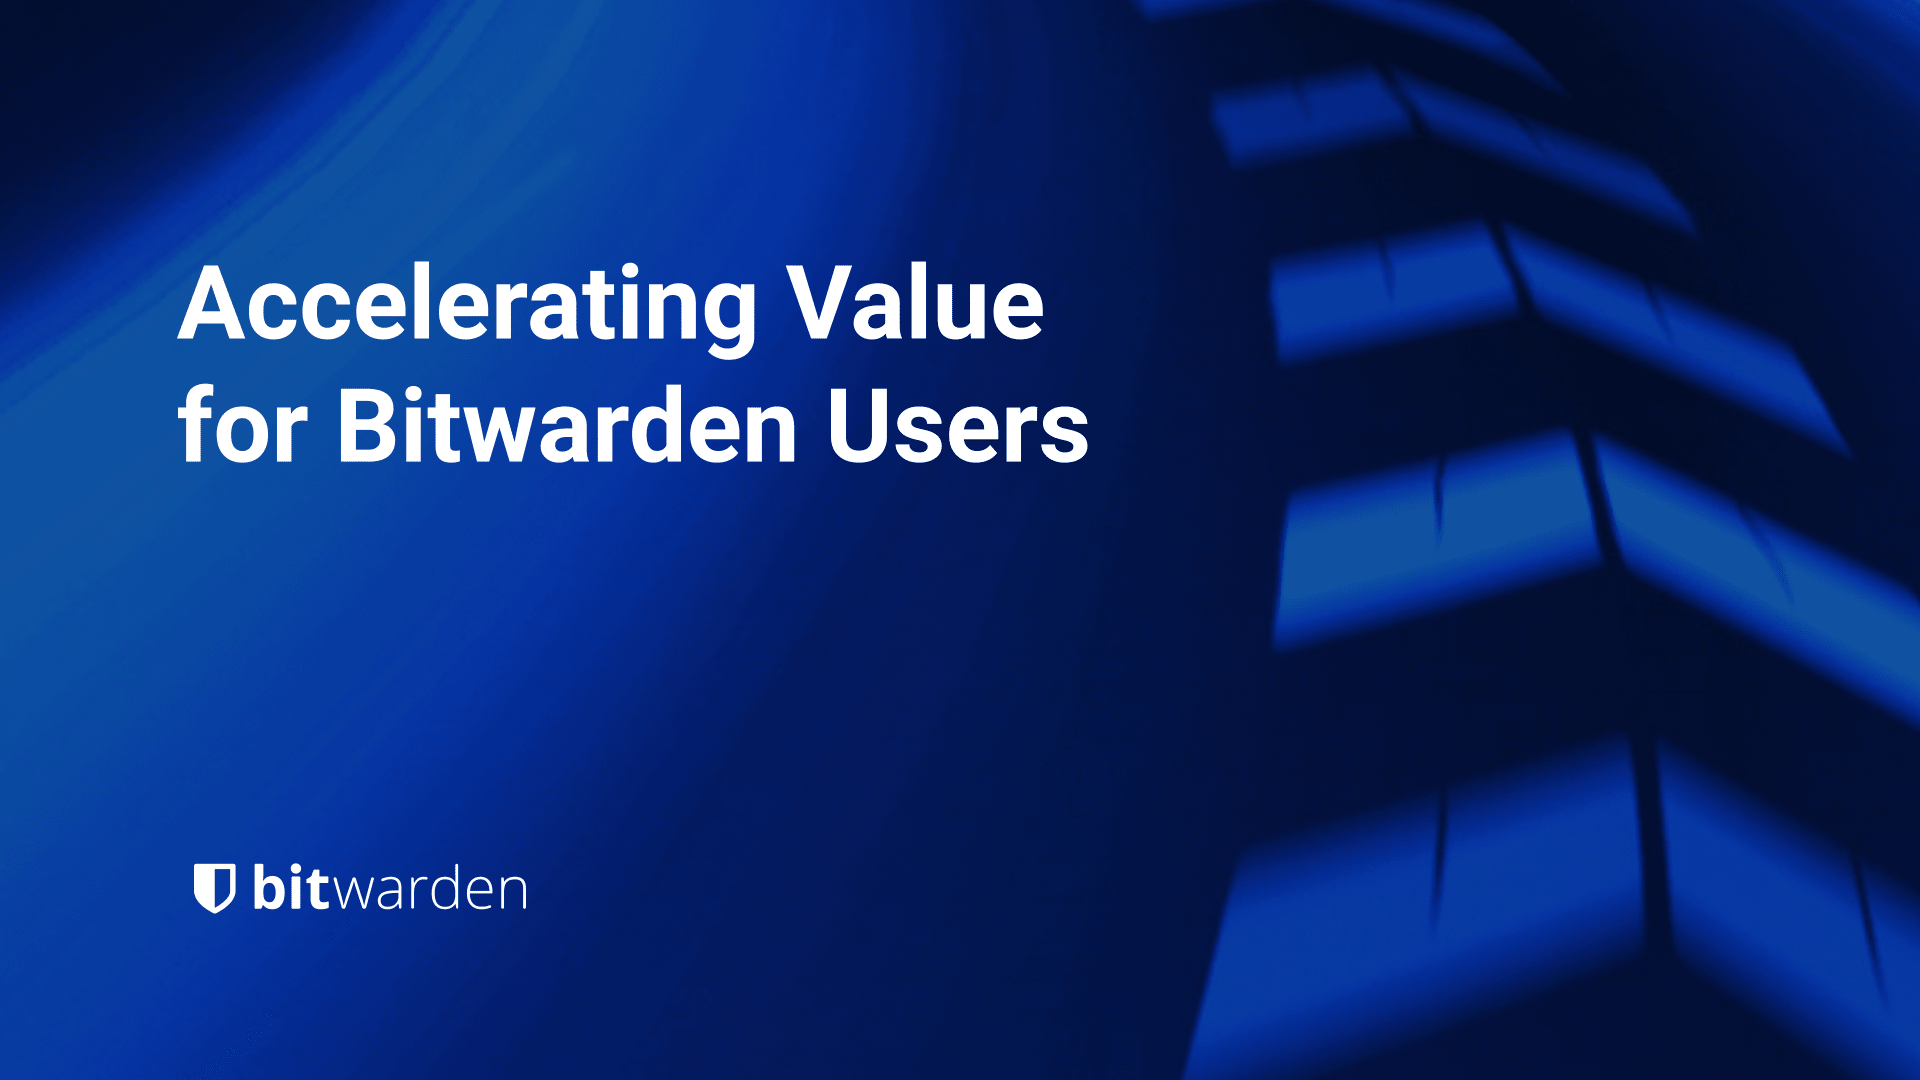 Accelerating value for Bitwarden users - 
